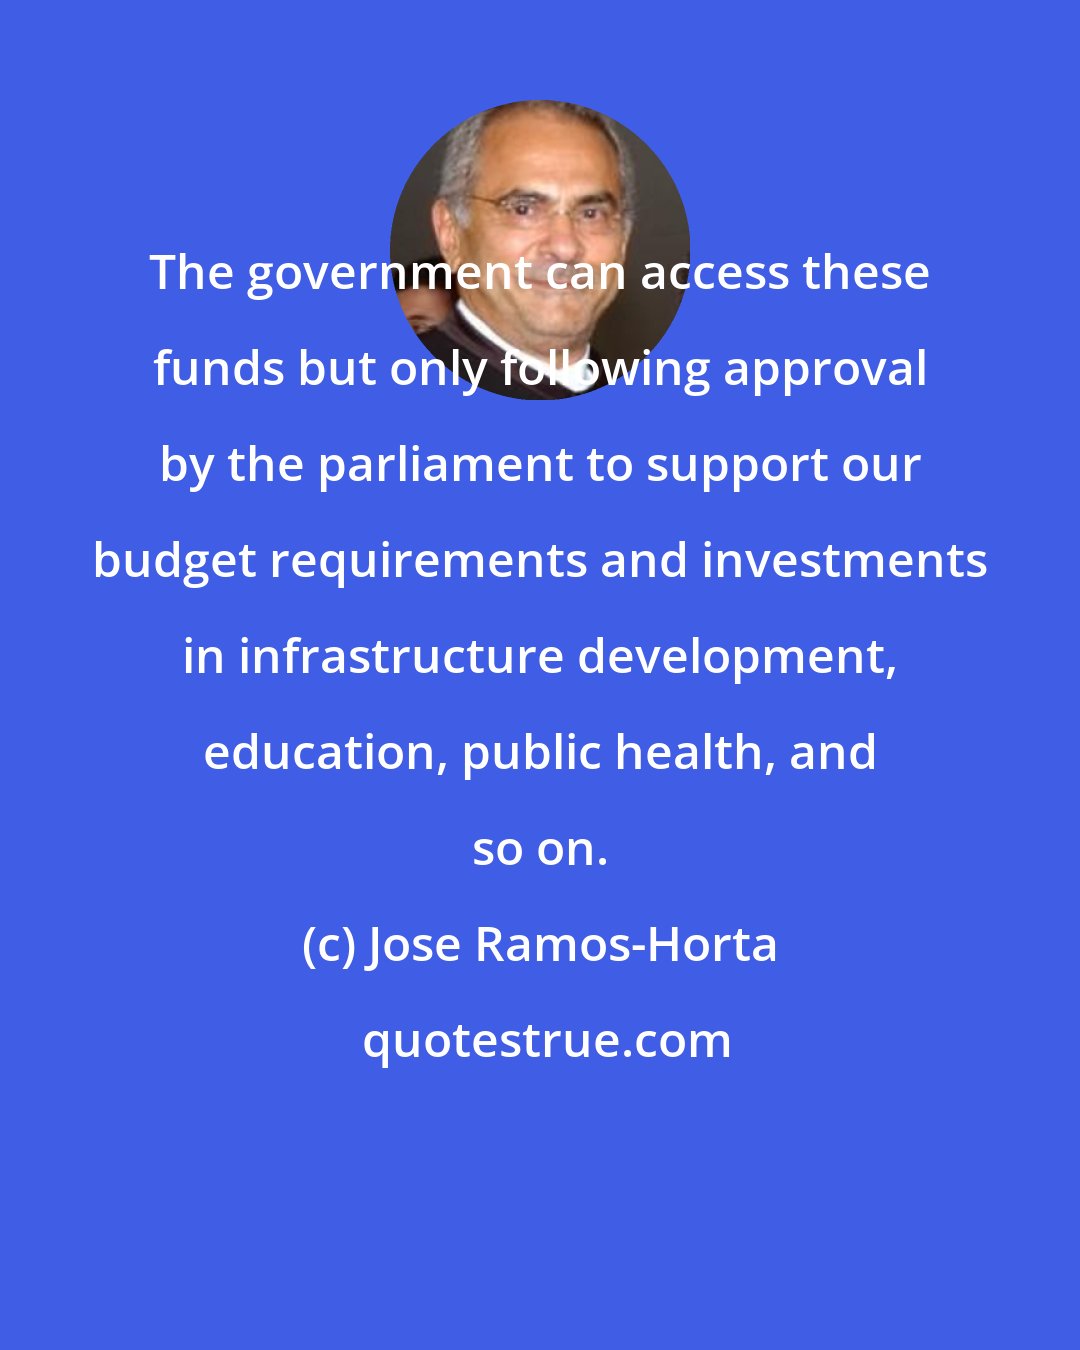 Jose Ramos-Horta: The government can access these funds but only following approval by the parliament to support our budget requirements and investments in infrastructure development, education, public health, and so on.